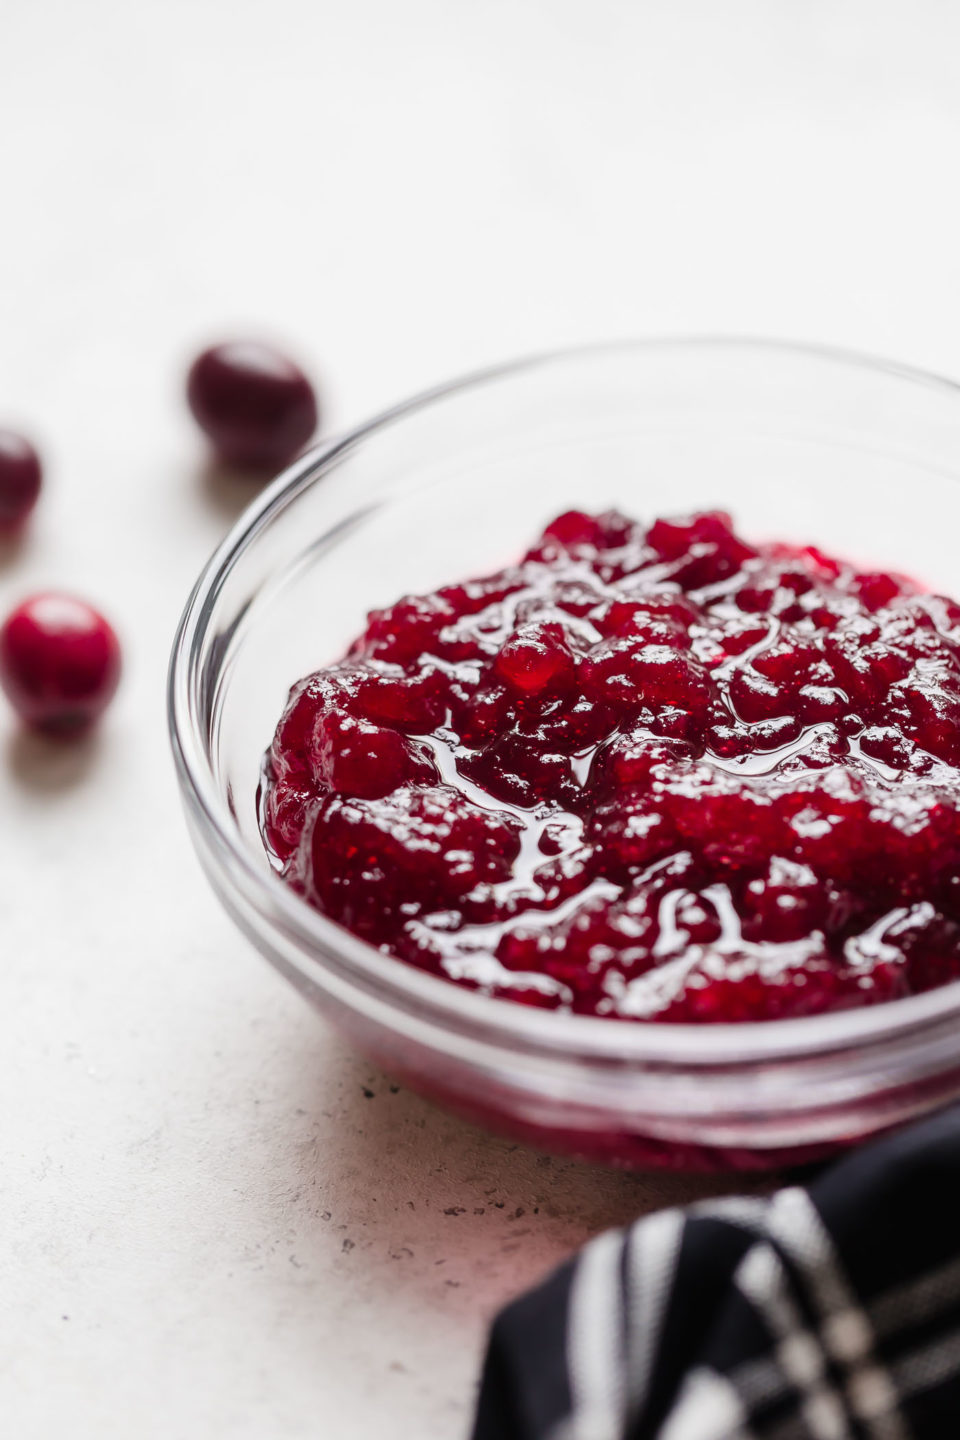 Whole berry cranberry sauce shown in a small glass mixing bowl.